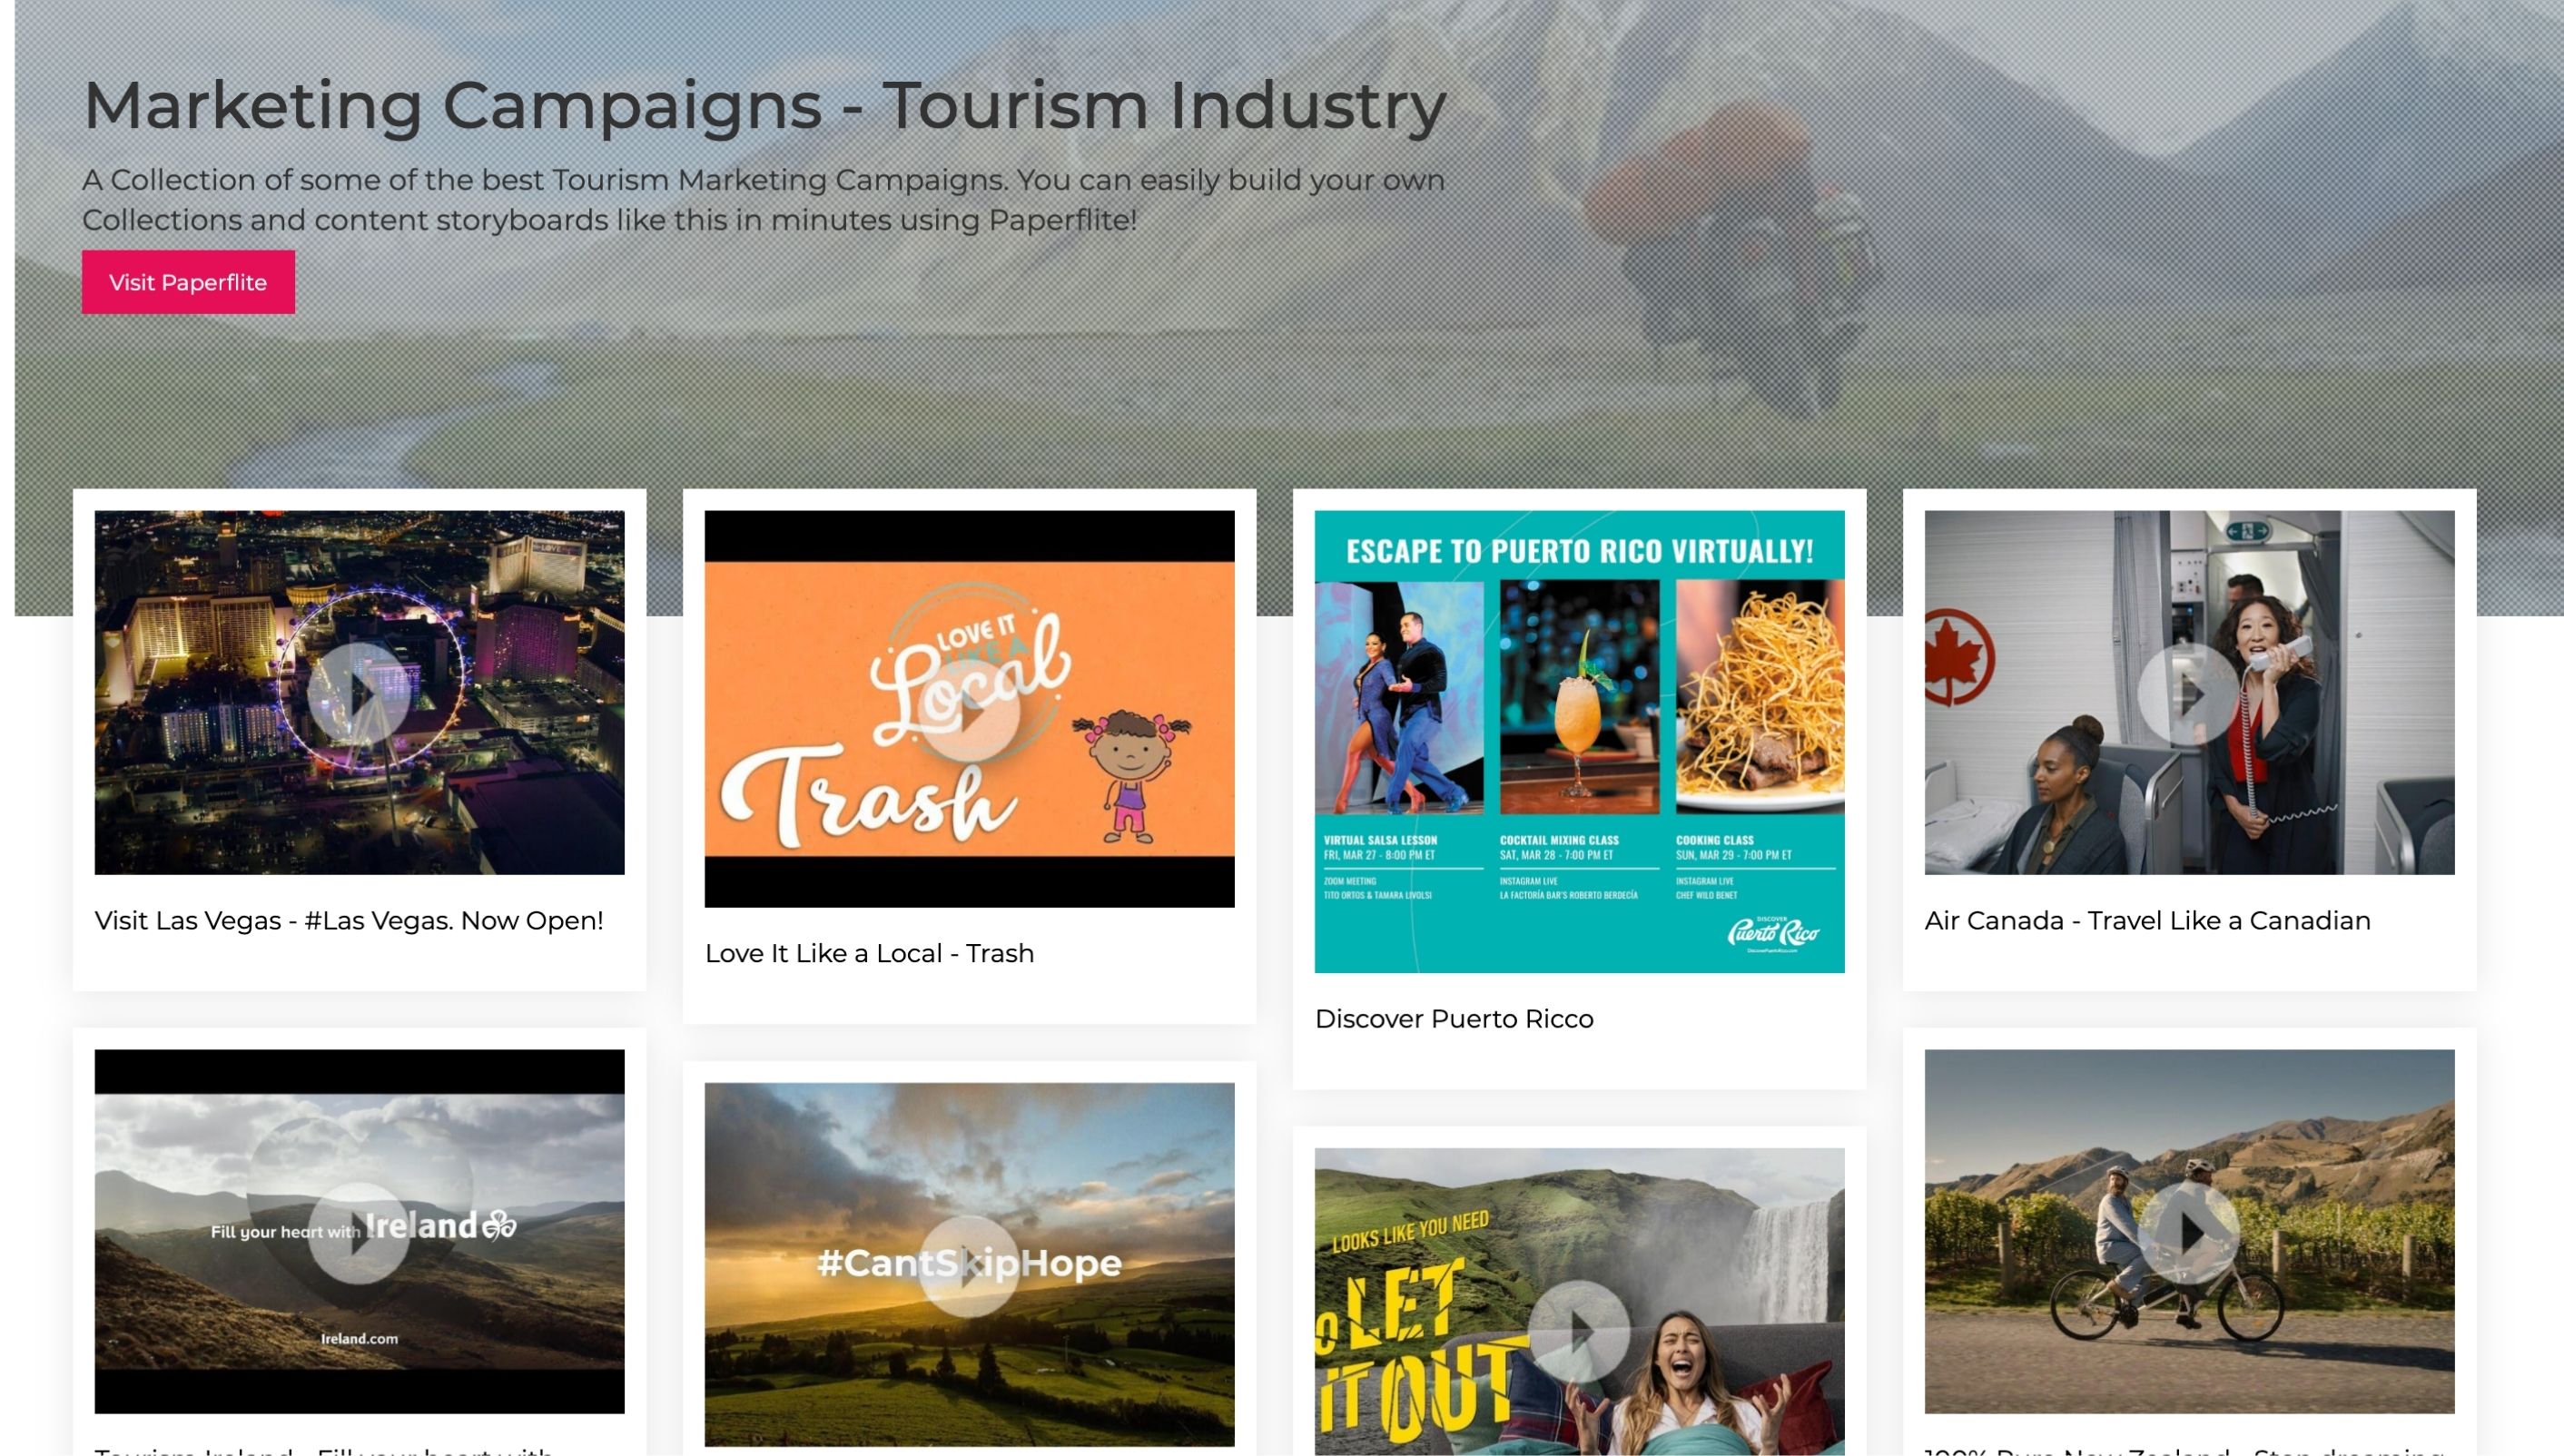 A Paperflite collection of Marketing Campaign examples in the Tourism industry